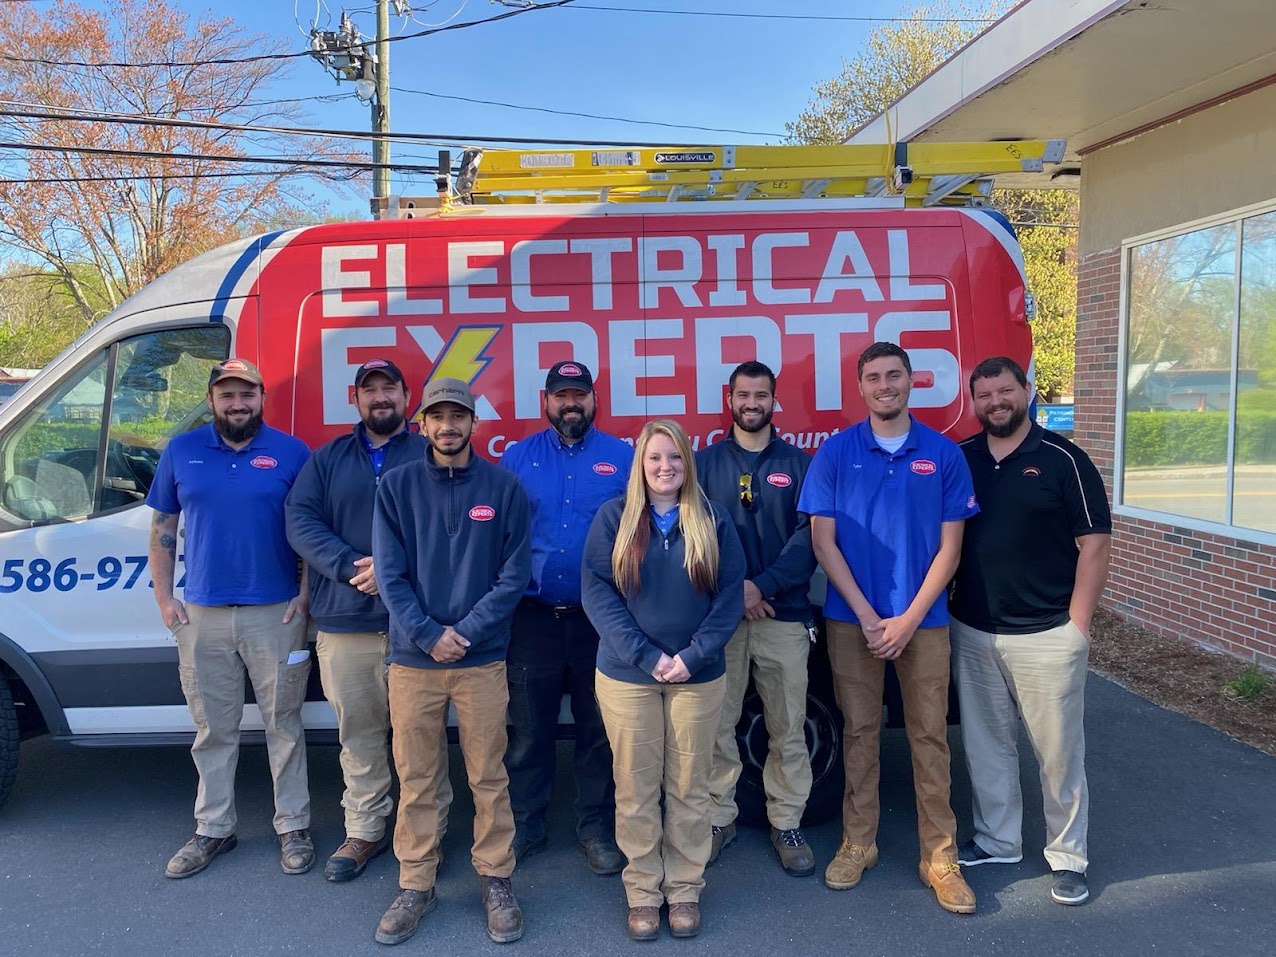 Electrical Experts